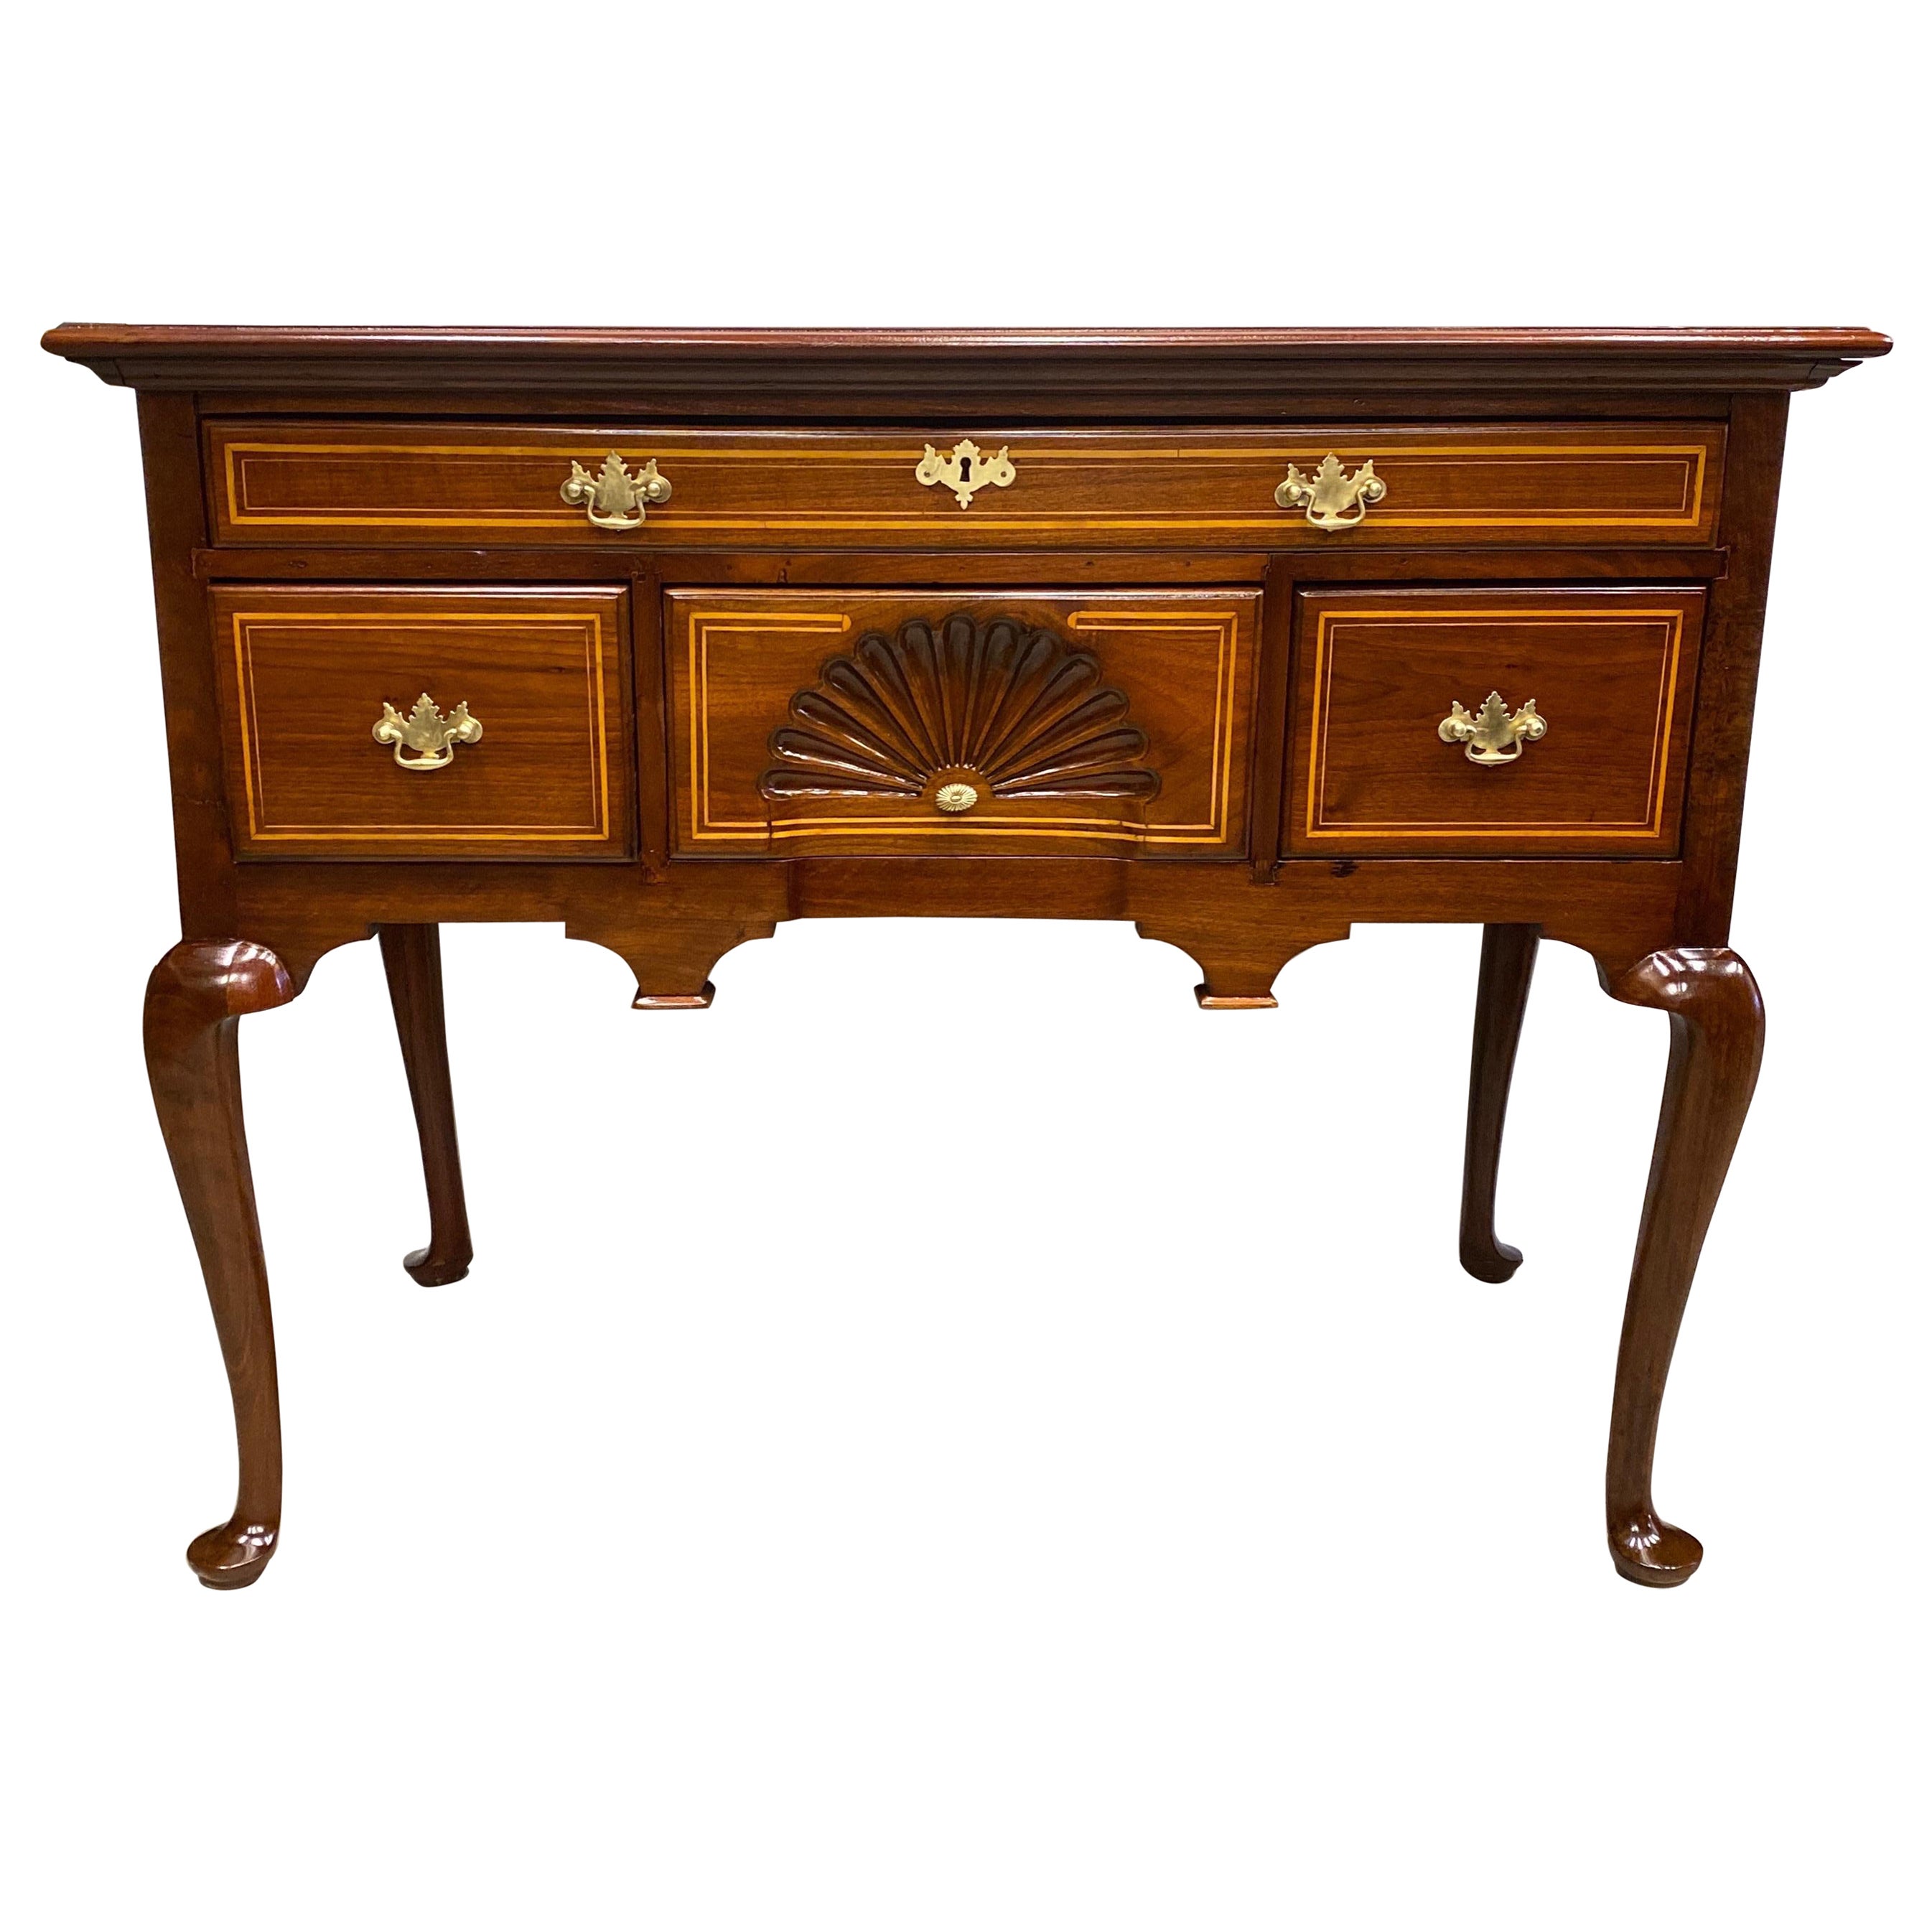 Early 19th Century Solid Cherry Inlaid Lowboy, Circa 1800 For Sale